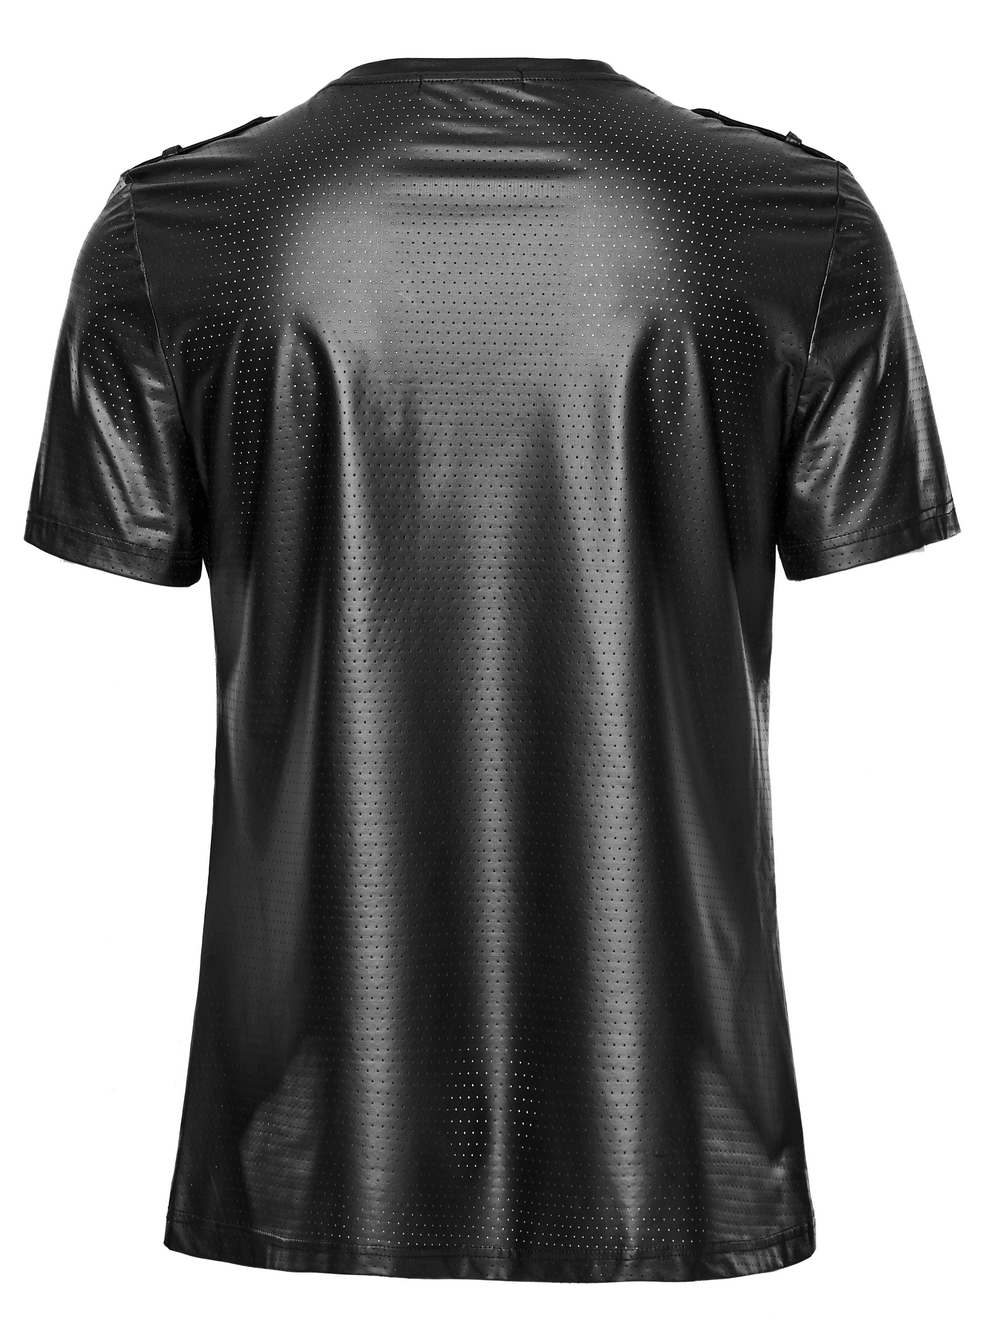 Men's Urban Black Mesh T-shirt with Front Perforated Pocket